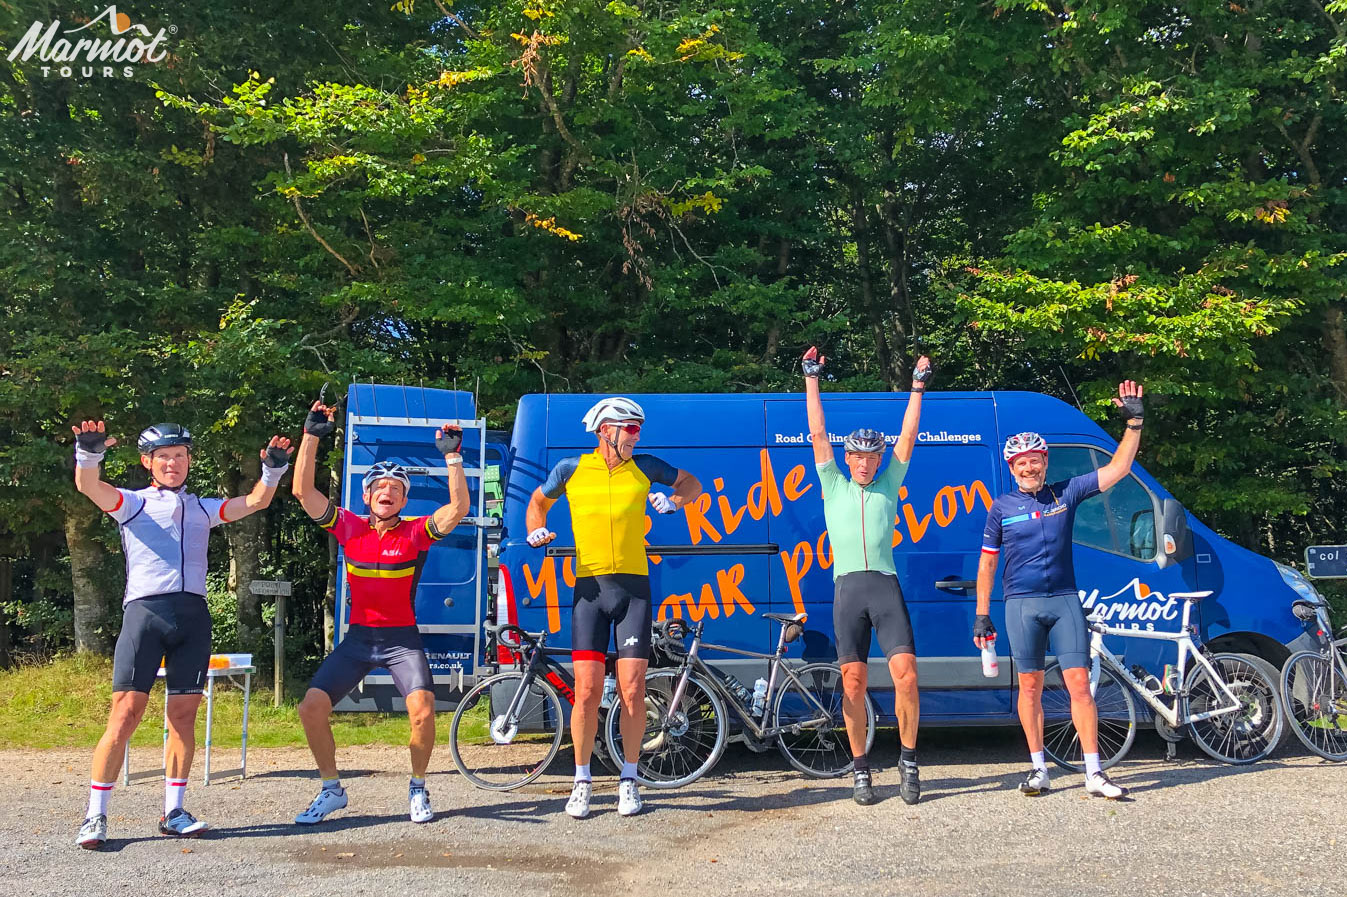 Cyclists jumping for joy on Marmot Tours cycling holidays in France